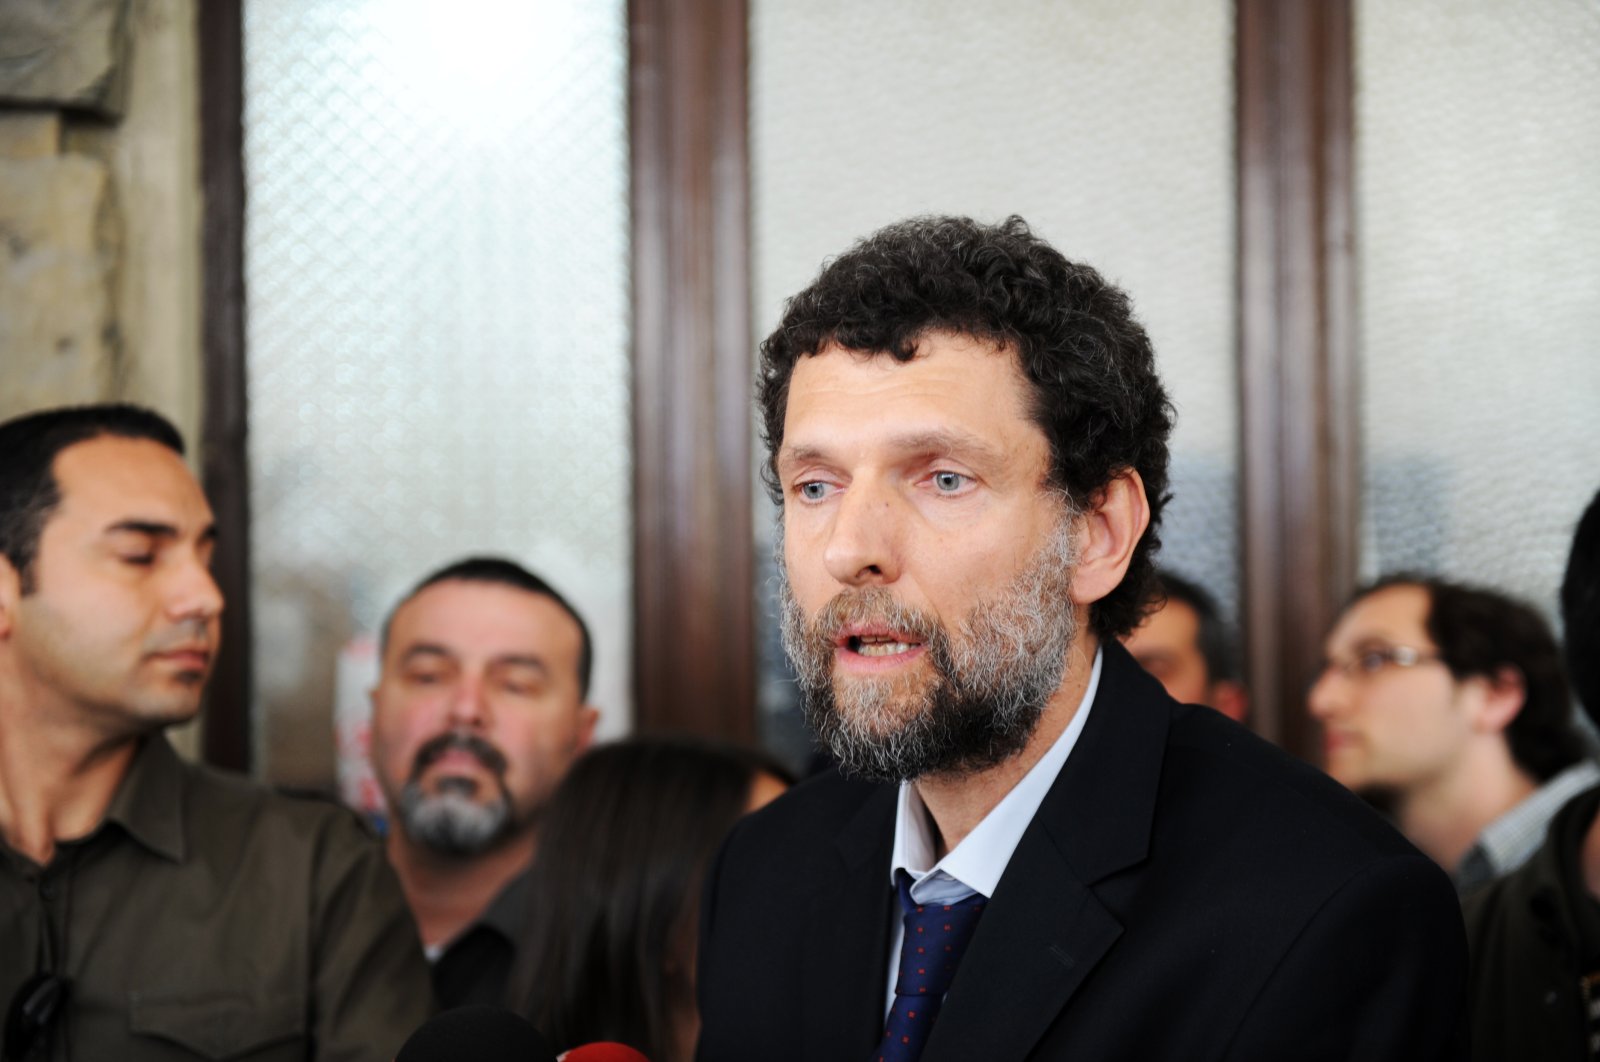 Osman Kavala attends an event in Istanbul, Turkey, April 24, 2010. (iStock Photo)